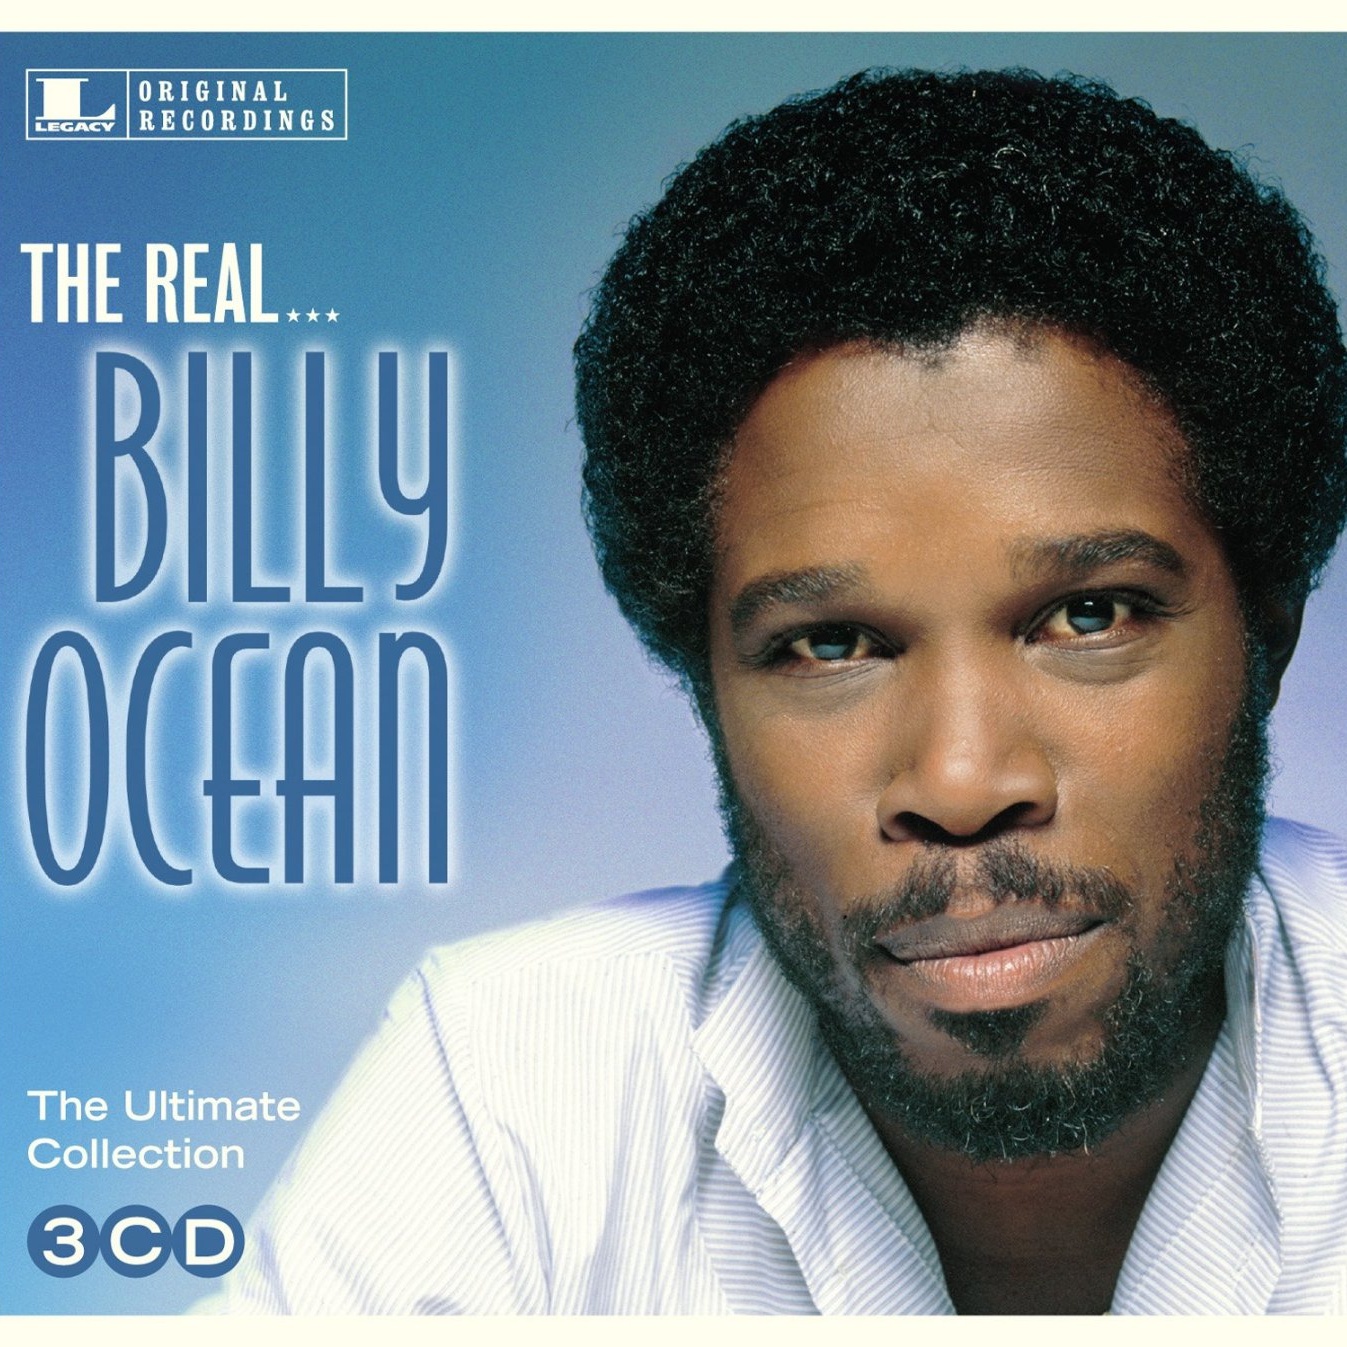 The Real...Billy Ocean